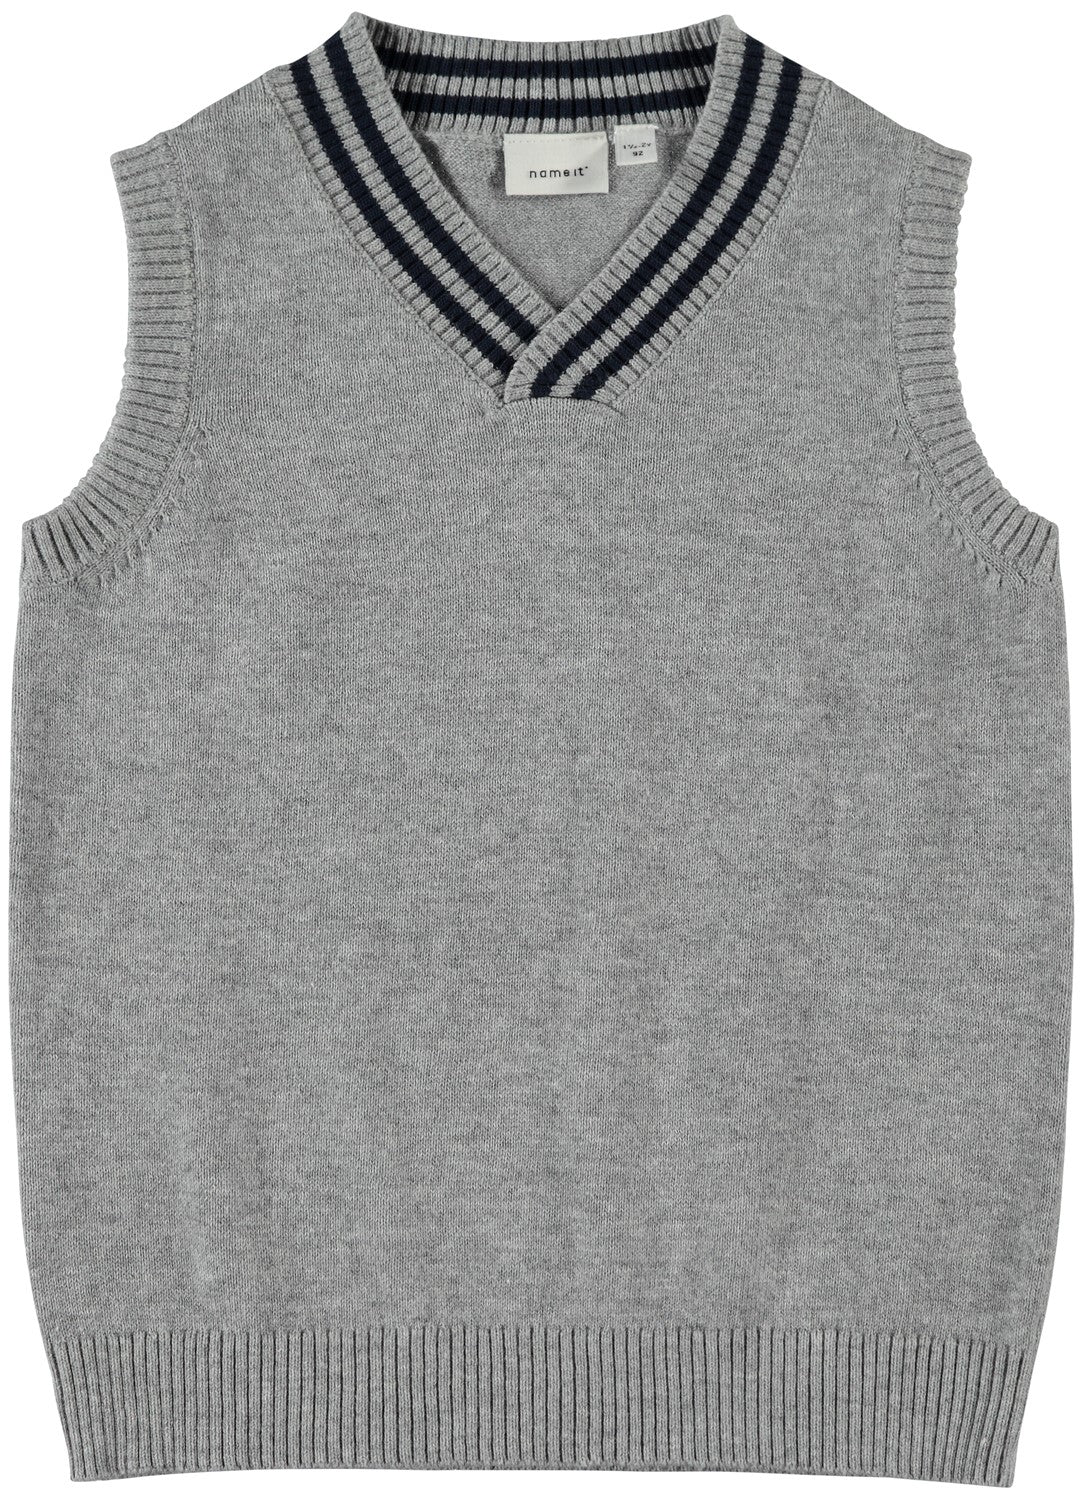 name it mini boy grey sleeveless pullover with navy collar detail